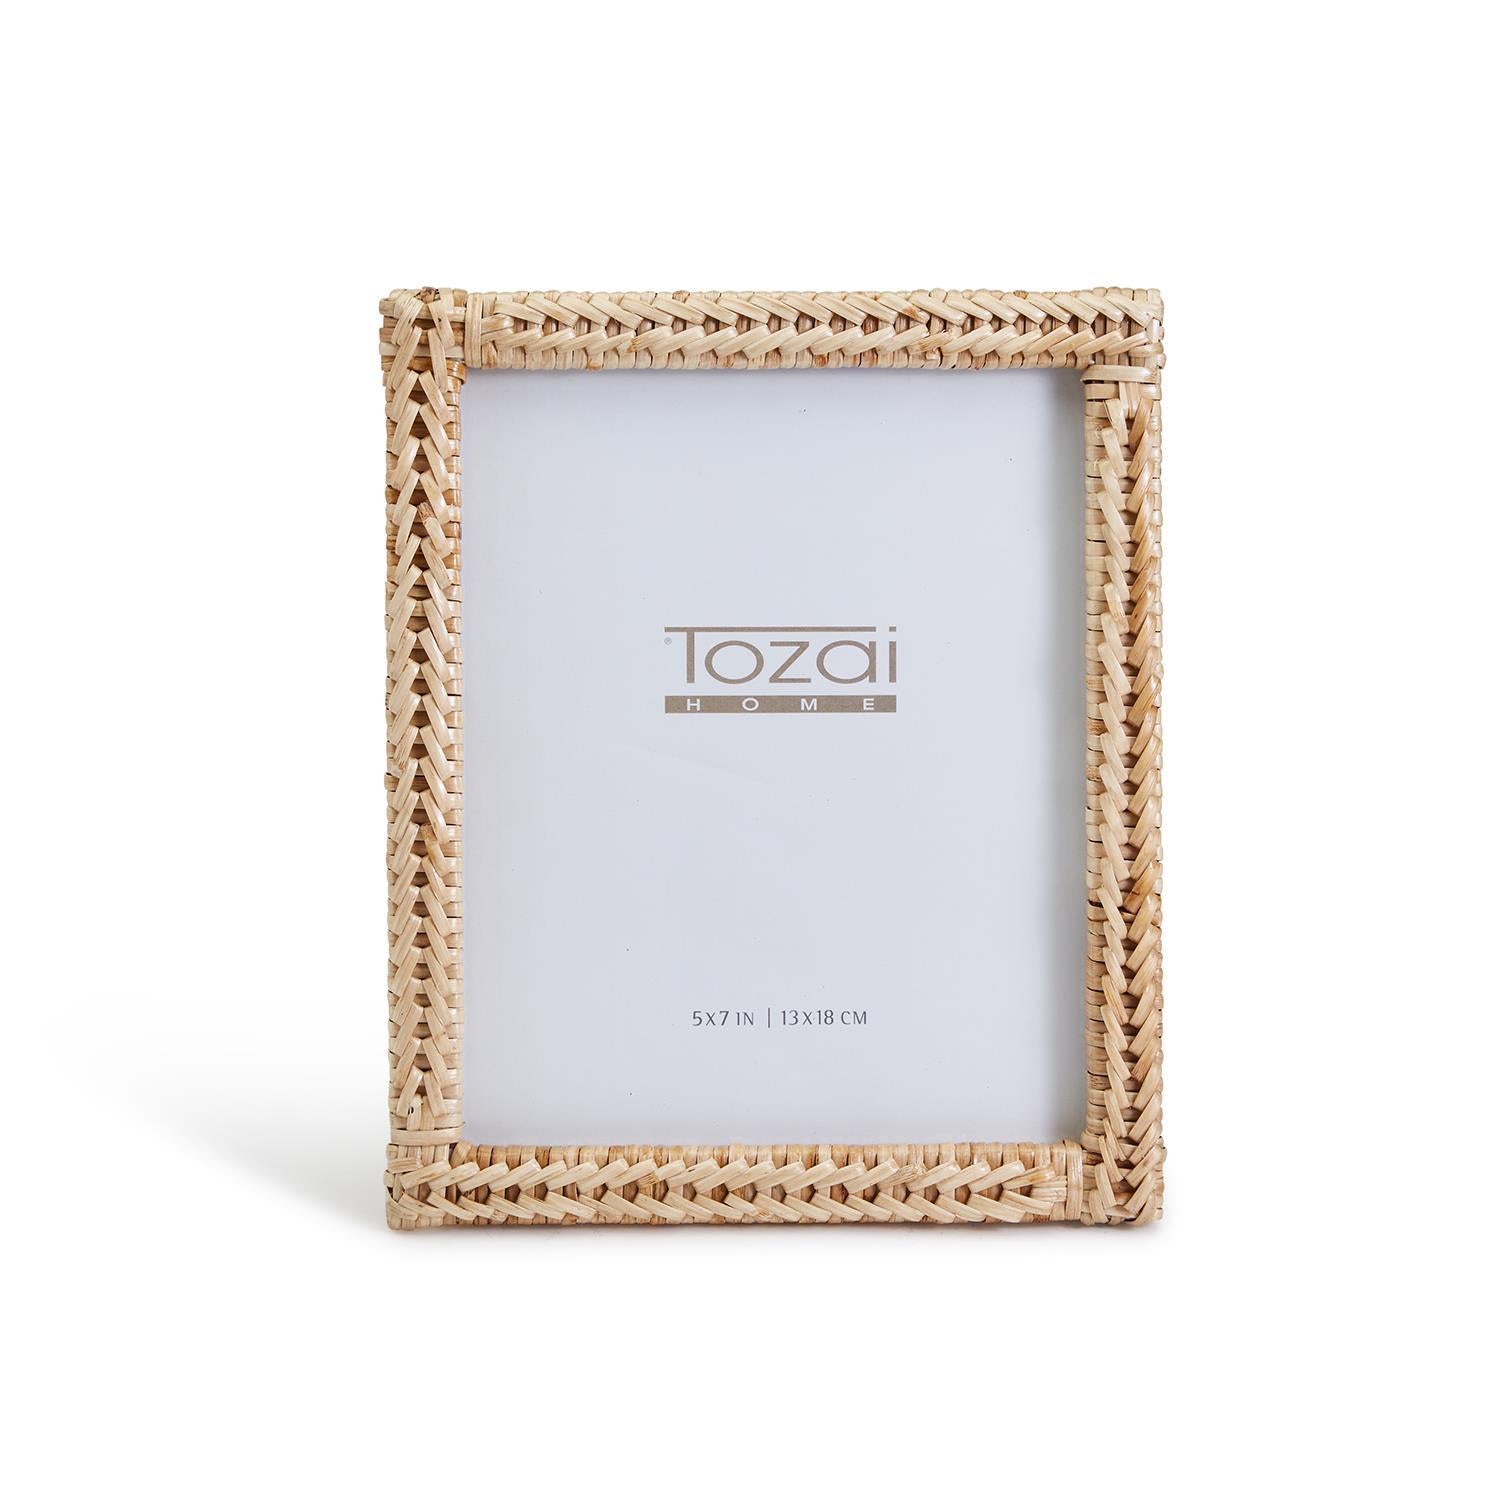 Two's Company 5 x 7 Woven Rattan Photo Frame